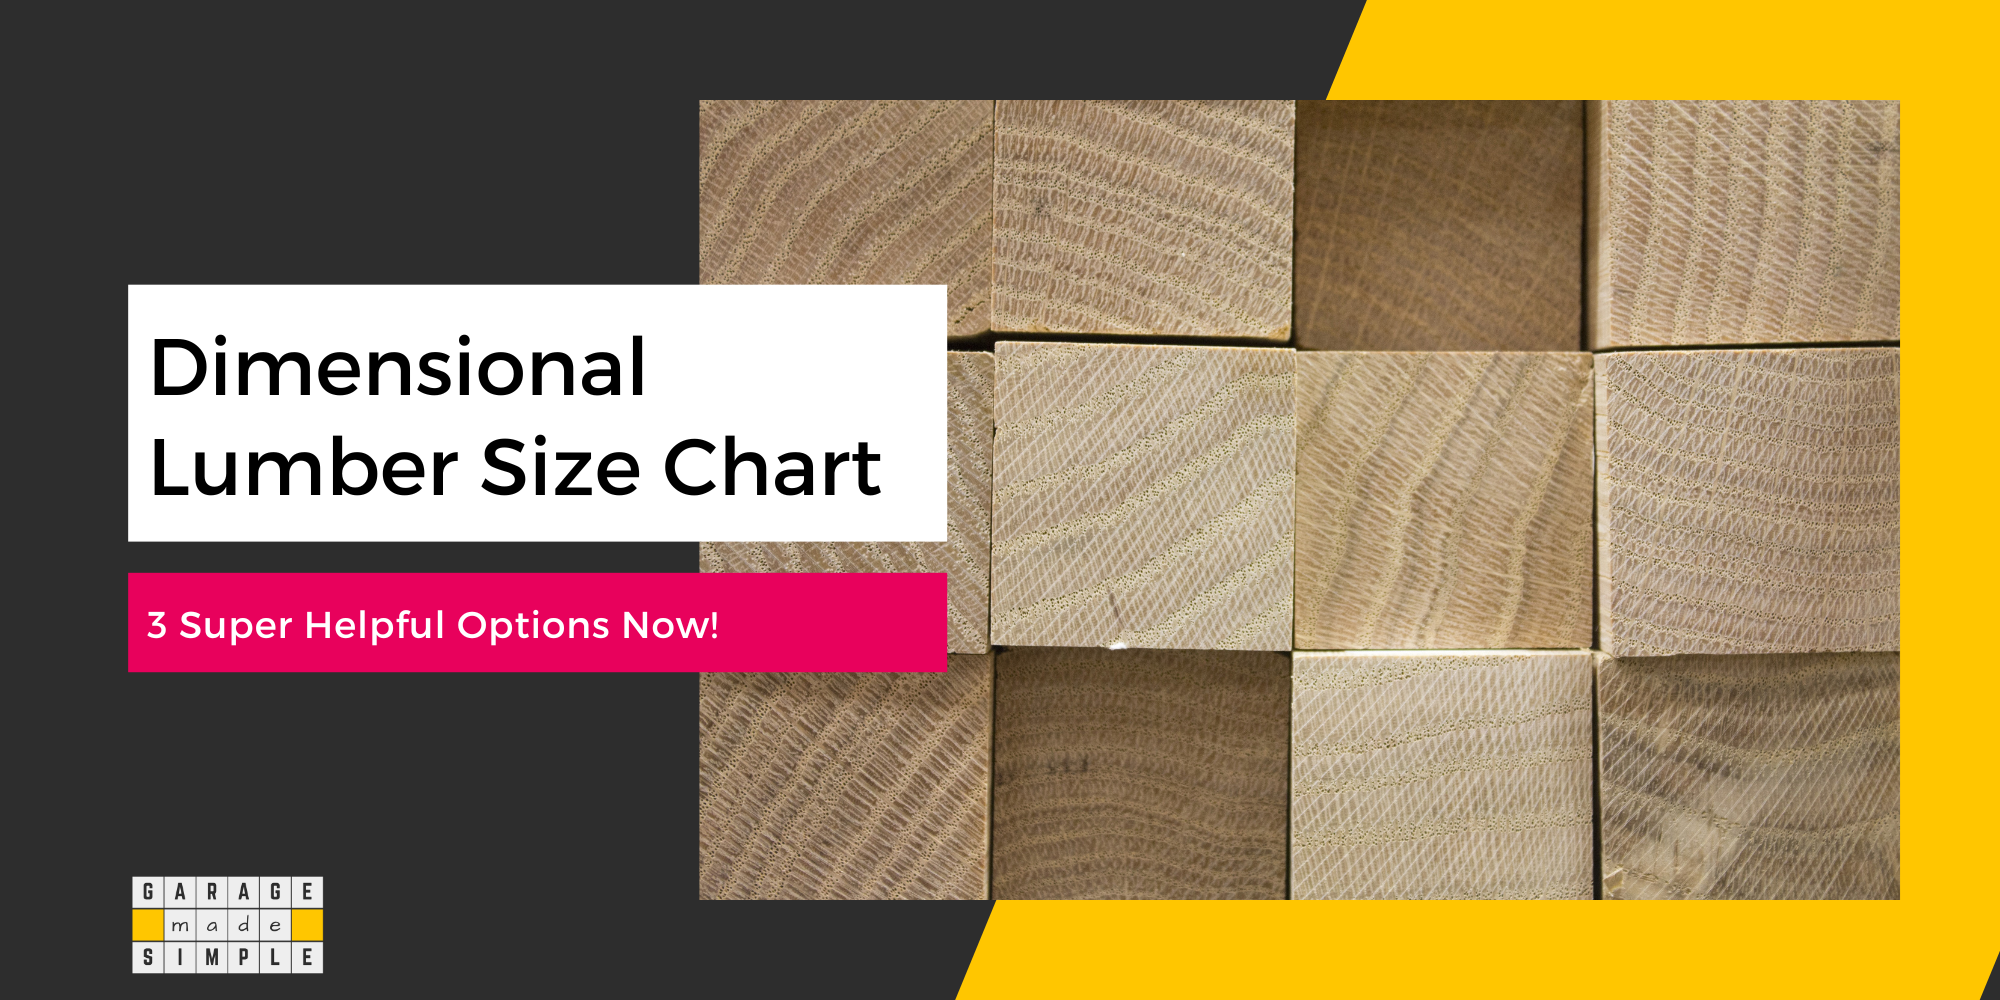 Dimensional Lumber Sizes Chart: 3 Super Helpful Options Now!